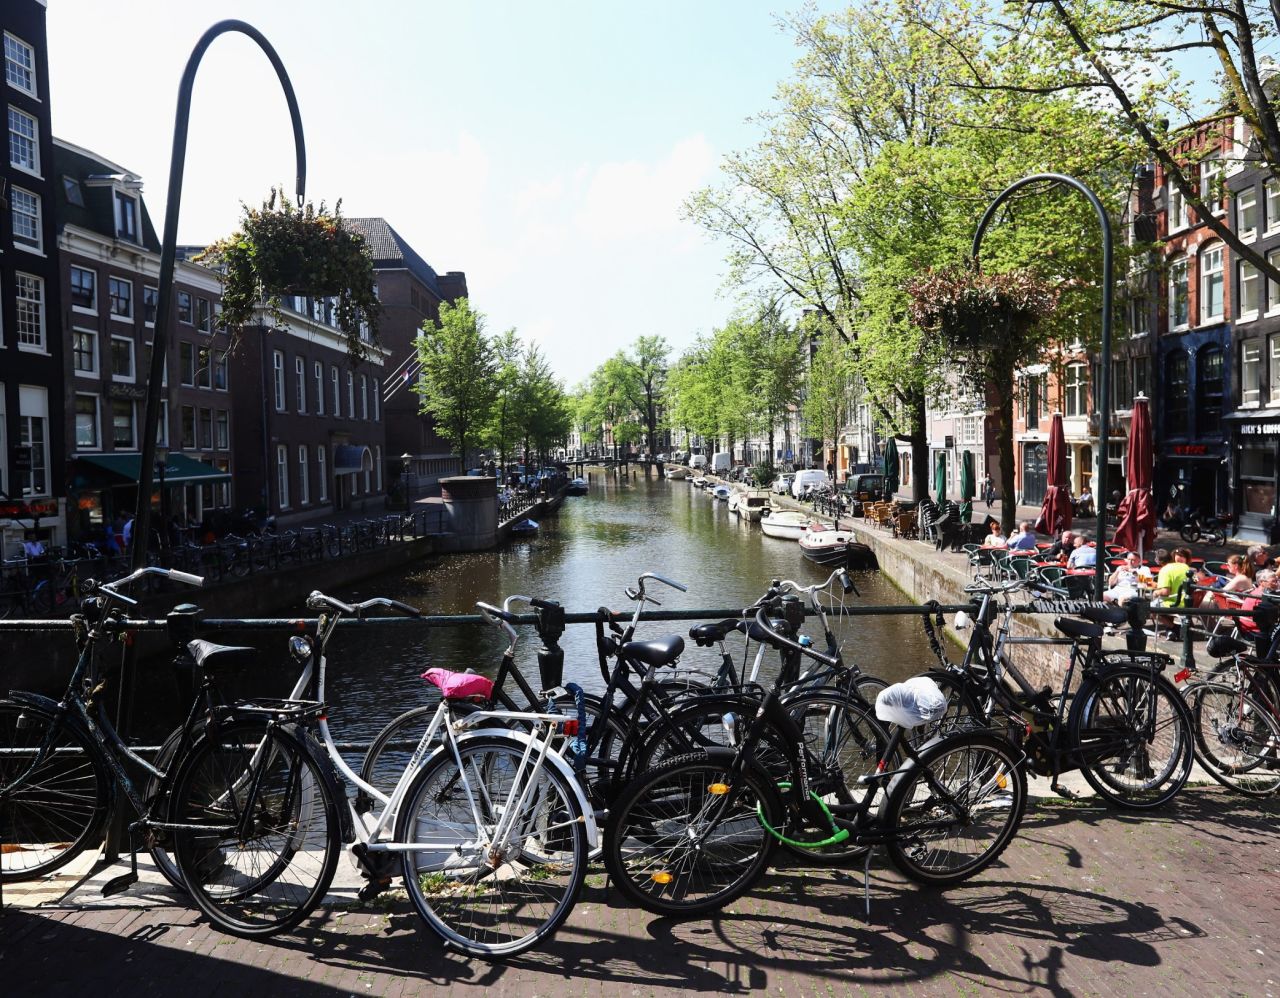 The famous canal of Amsterdam is a must-see. Cycle down the canal and check out the 800-year-old Oude Kerk "Old Church," the Dutch capital's oldest building and oldest parish church, built 1213.